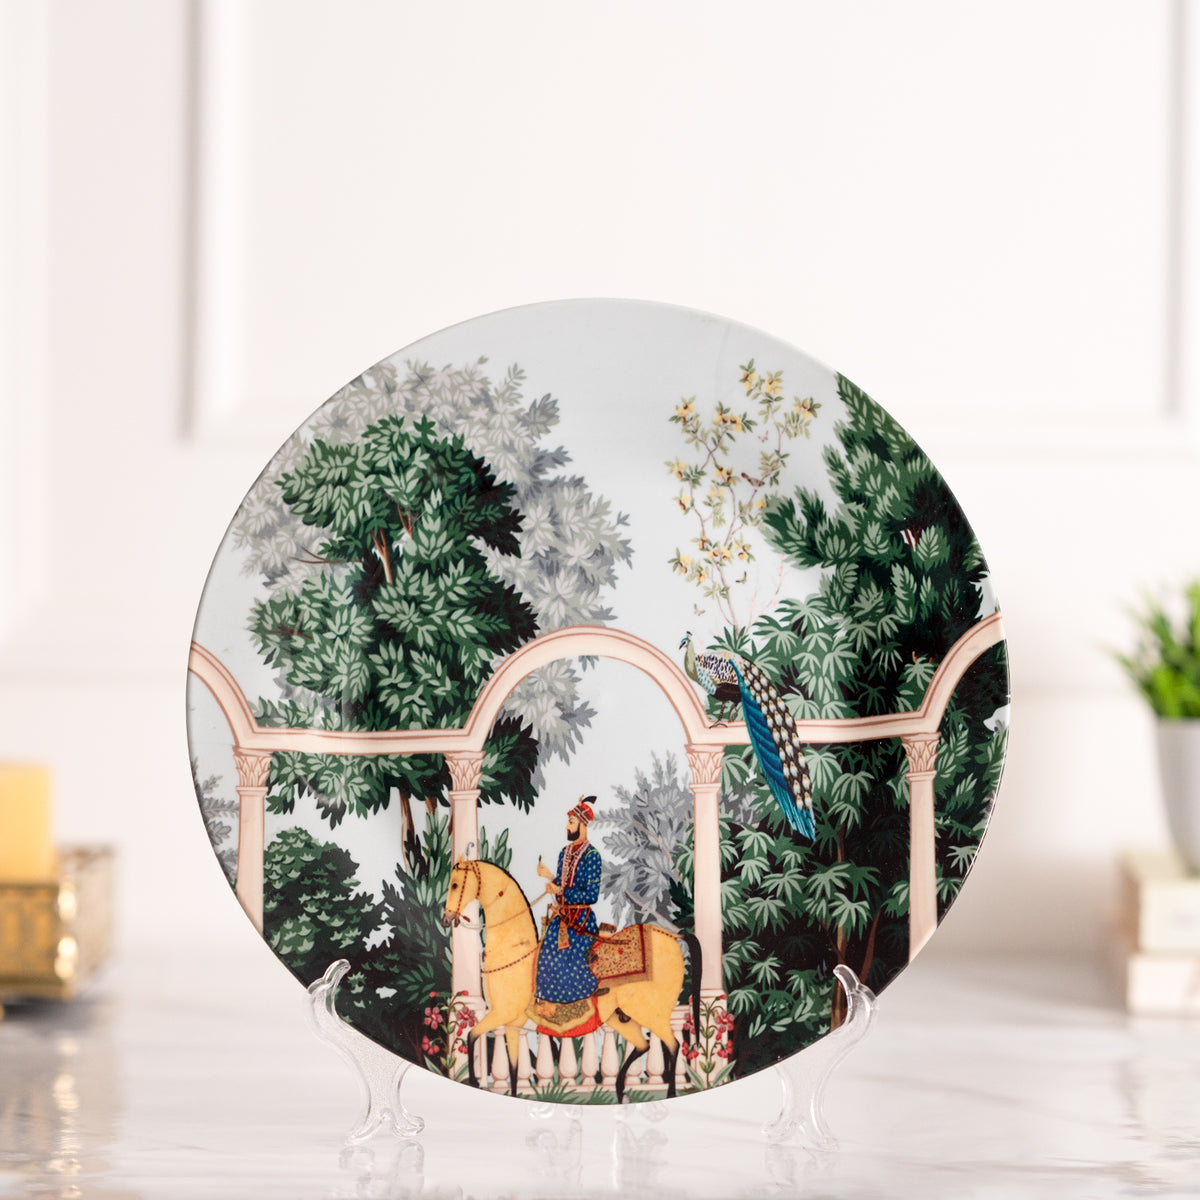 Timeless Tales  Ceramic wall plates decor hanging / tabletop